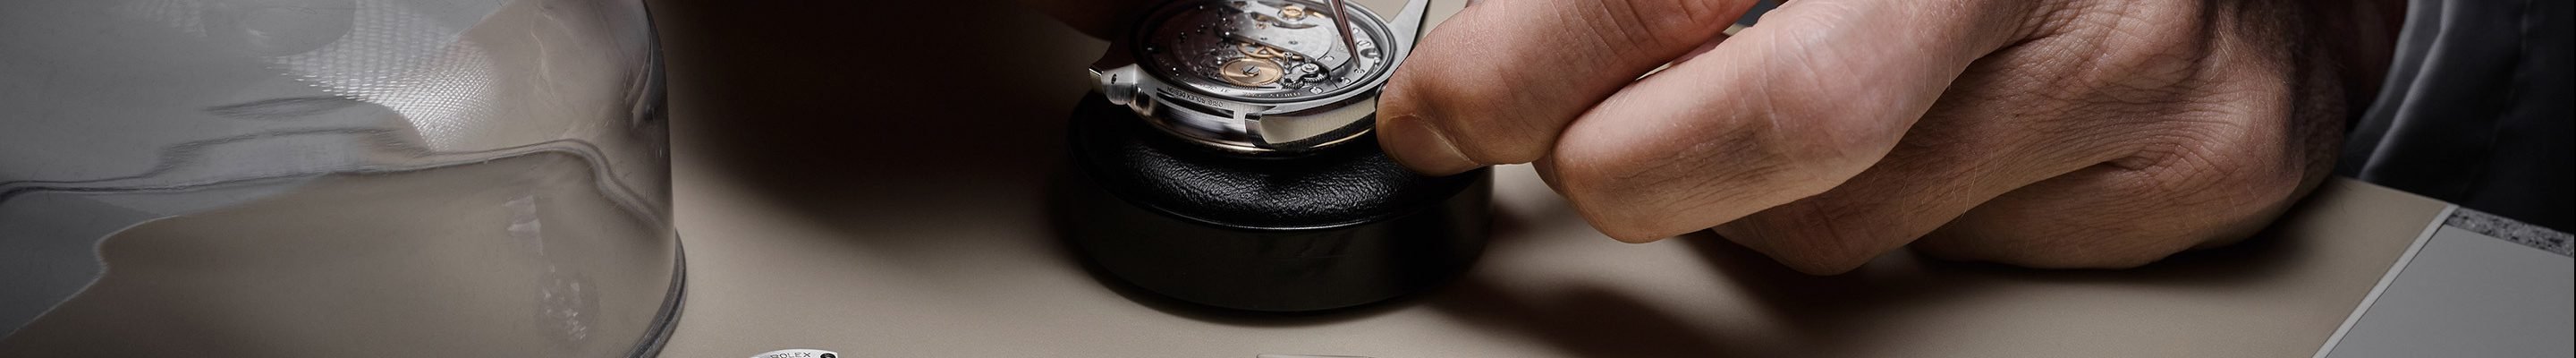 Detail of a Rolex watch being serviced by a watchmaker